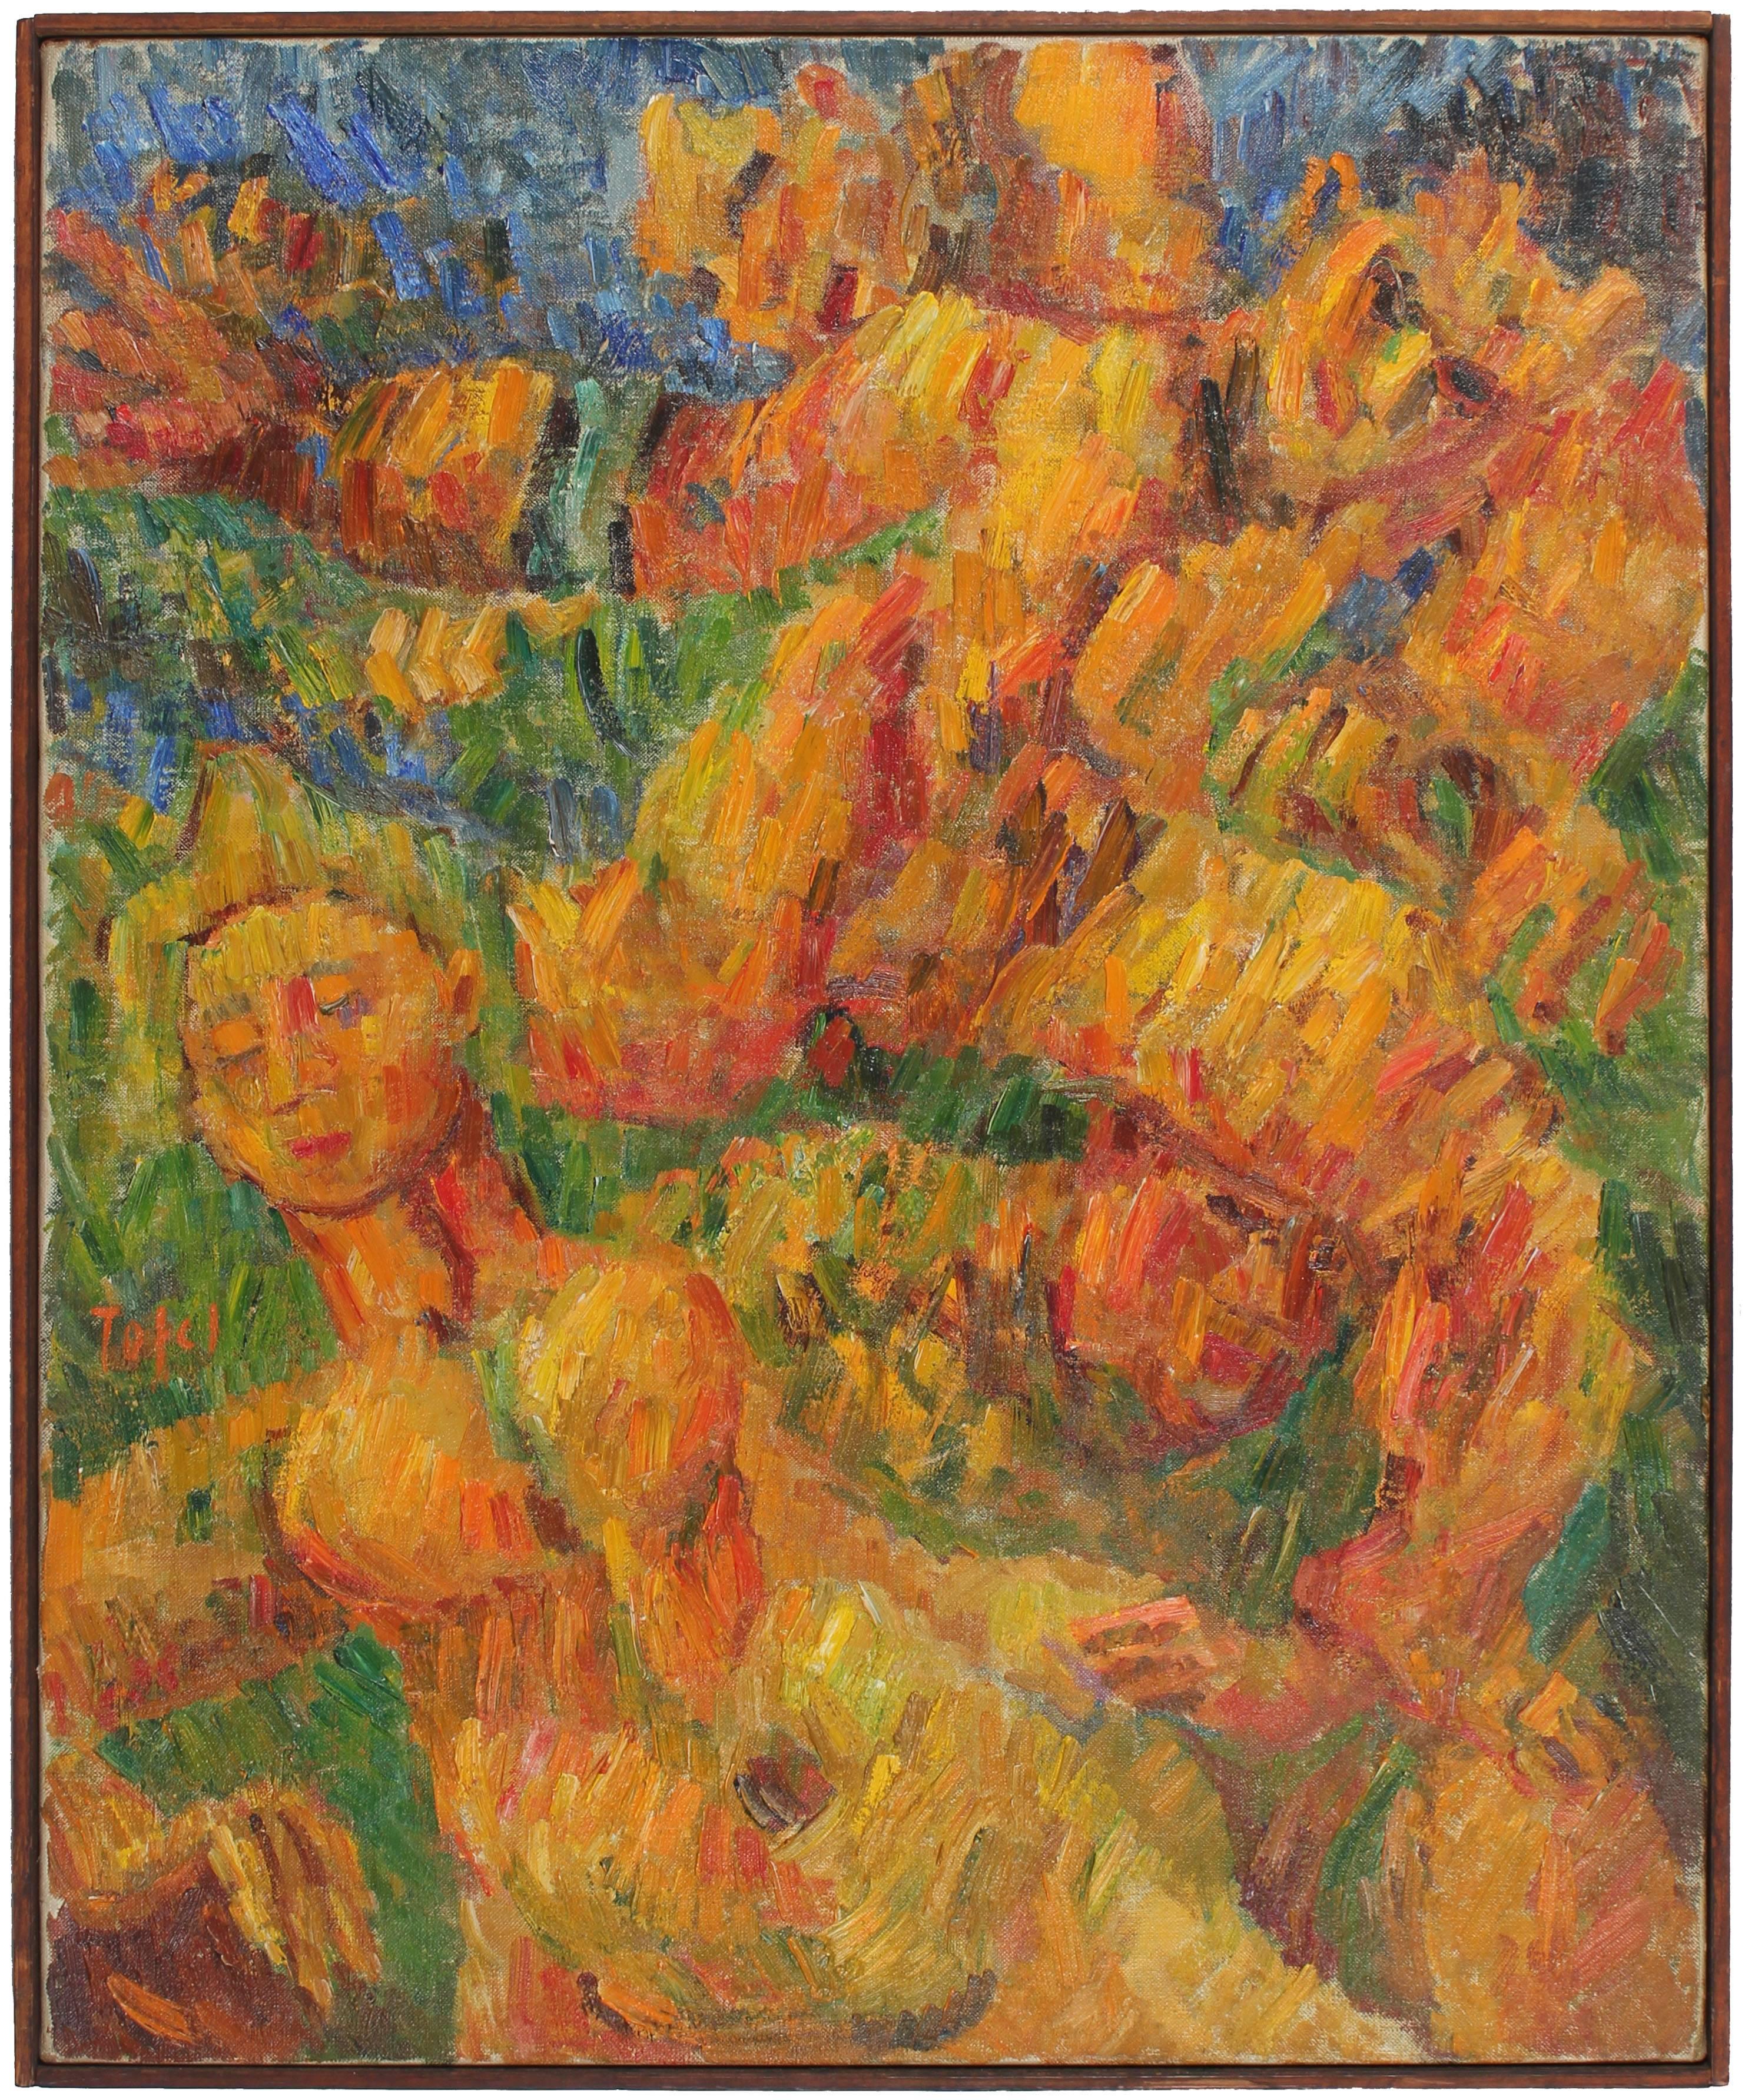 Jennings Tofel Figurative Painting - "Running Man" Expressionist Oil, 1948